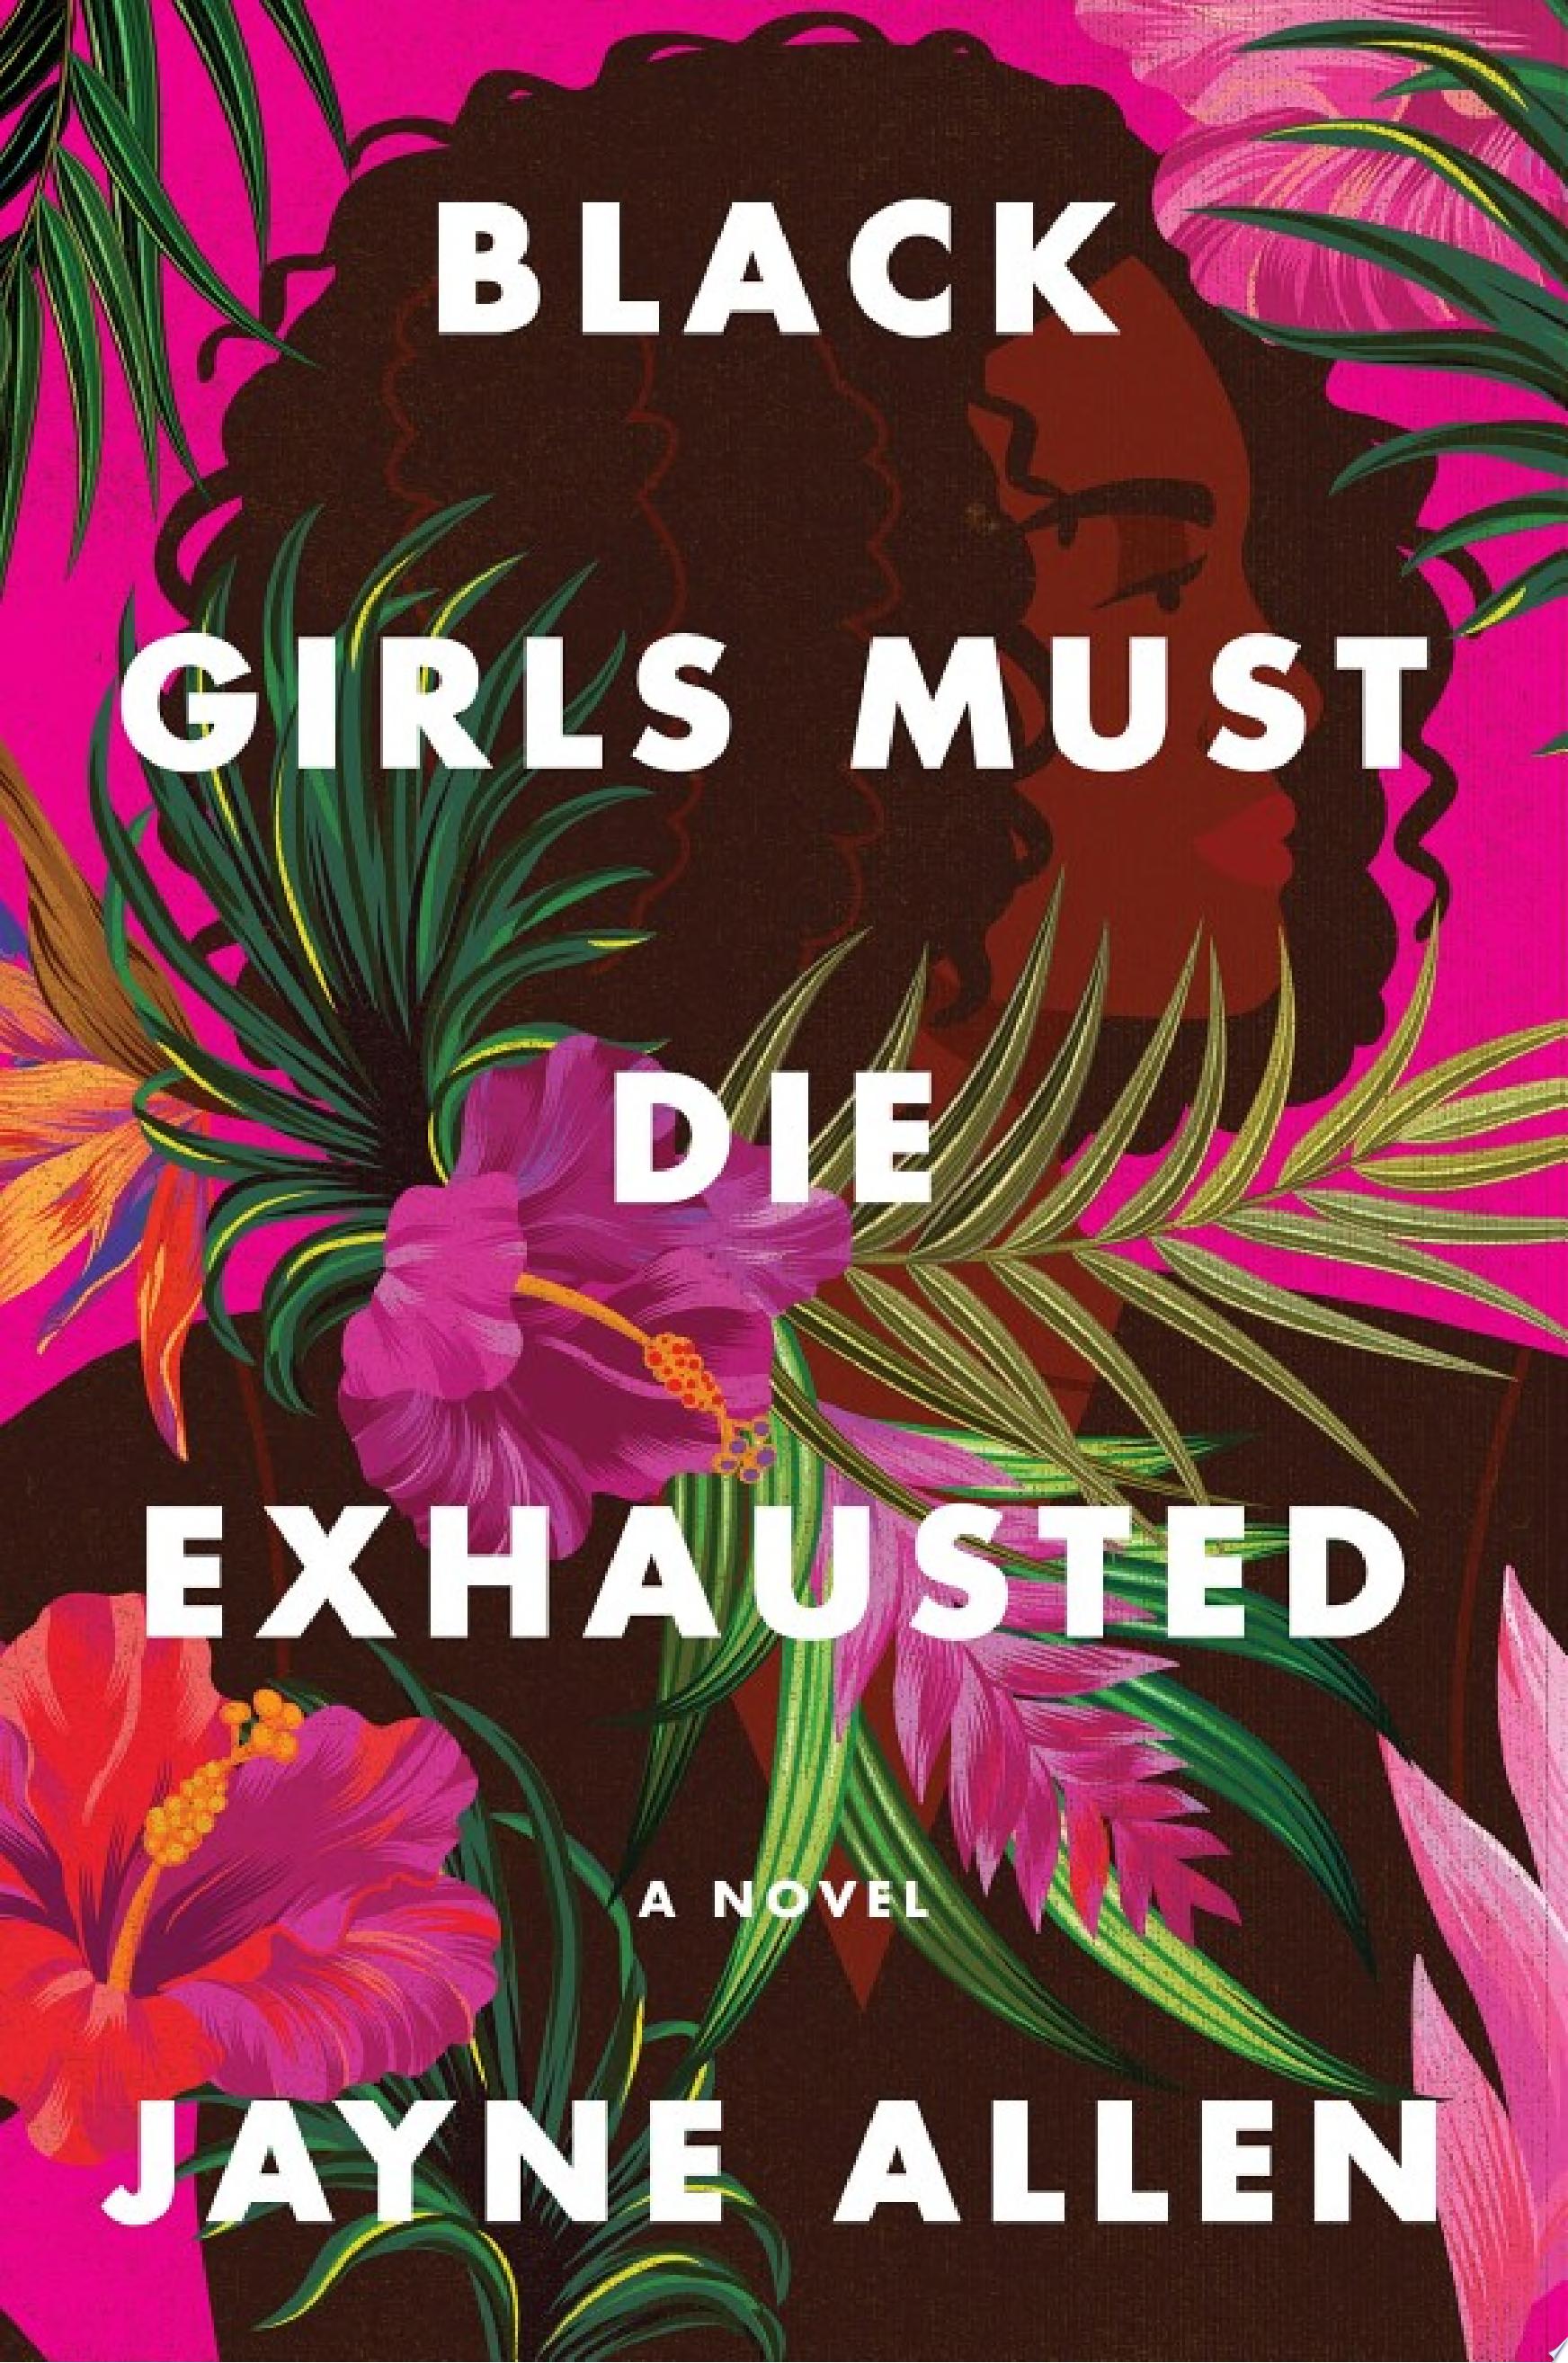 Image for "Black Girls Must Die Exhausted"